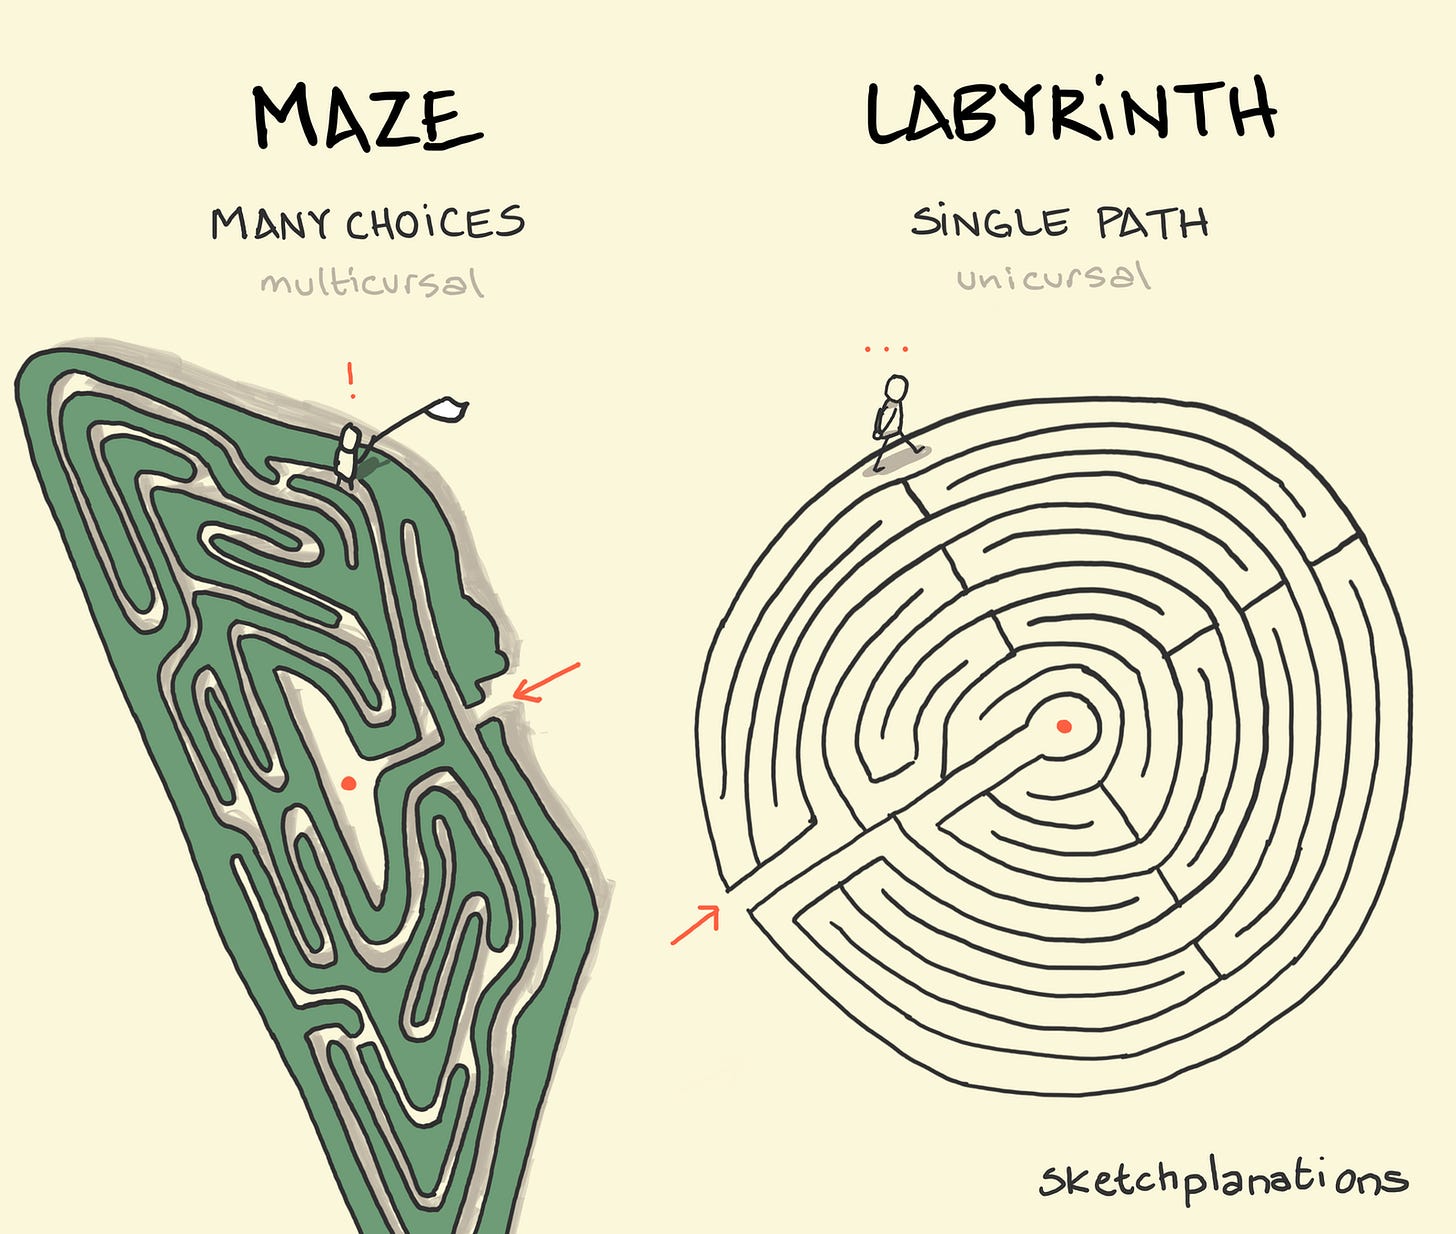 Labyrinths and mazes - Sketchplanations